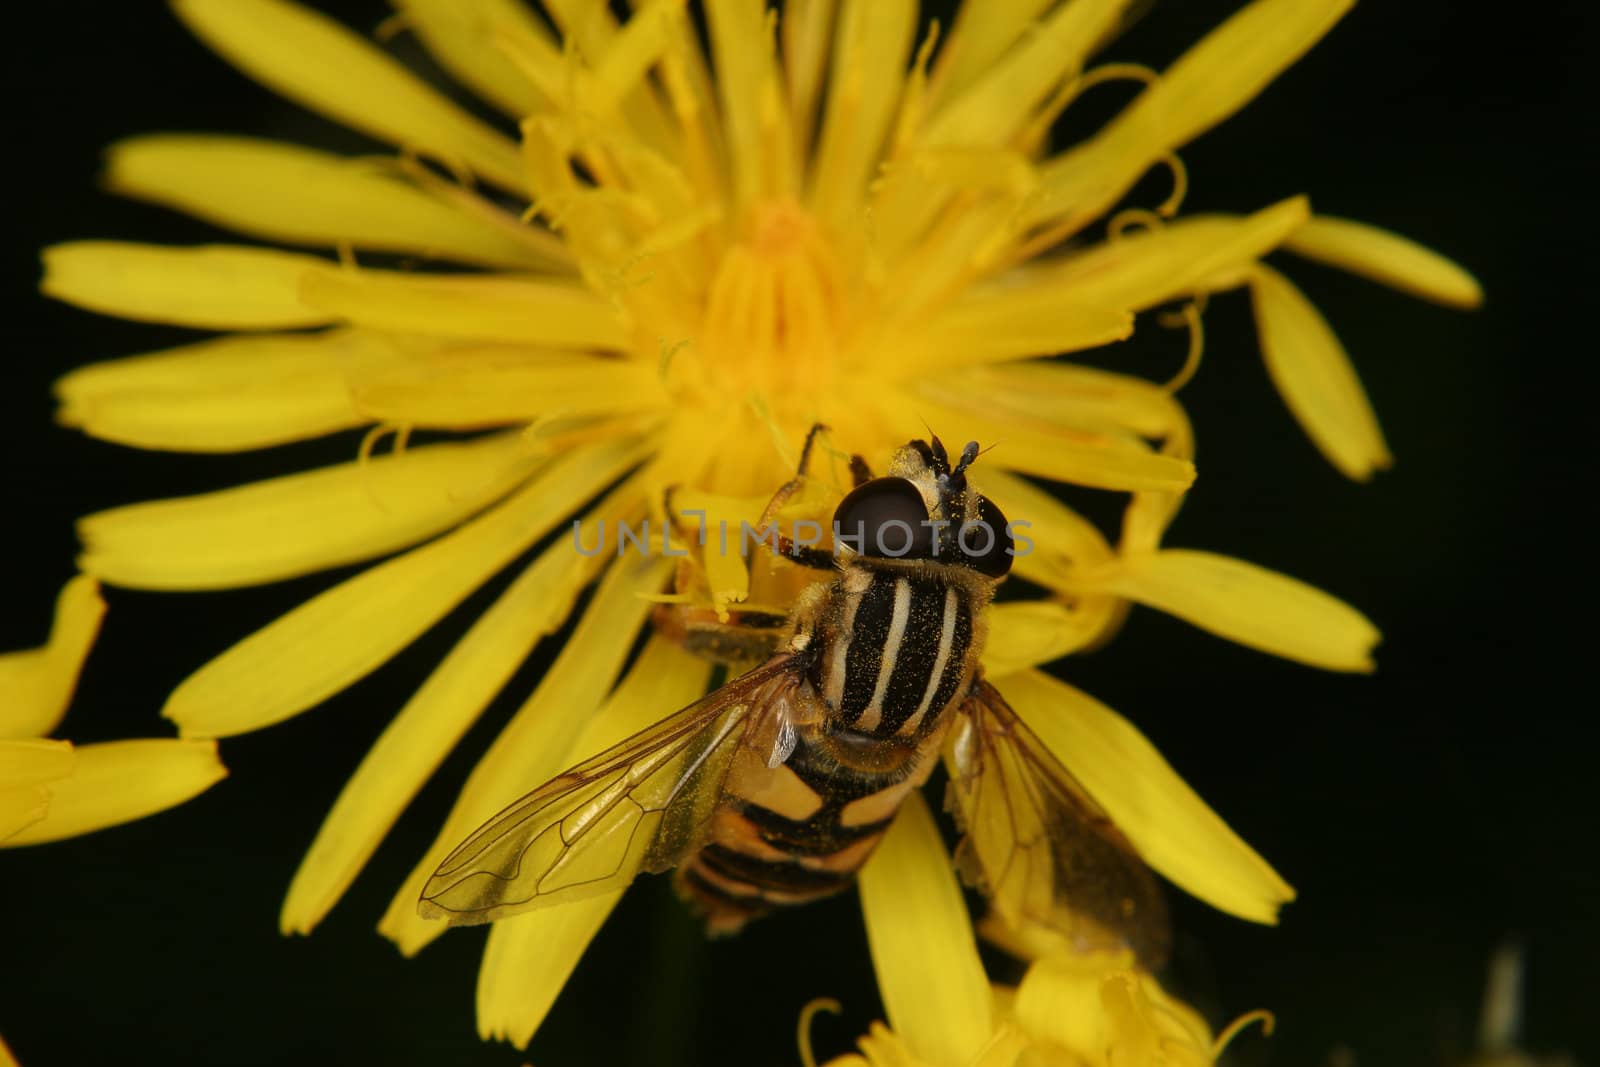 European hoverfly (Helophilus trivittatus) by tdietrich